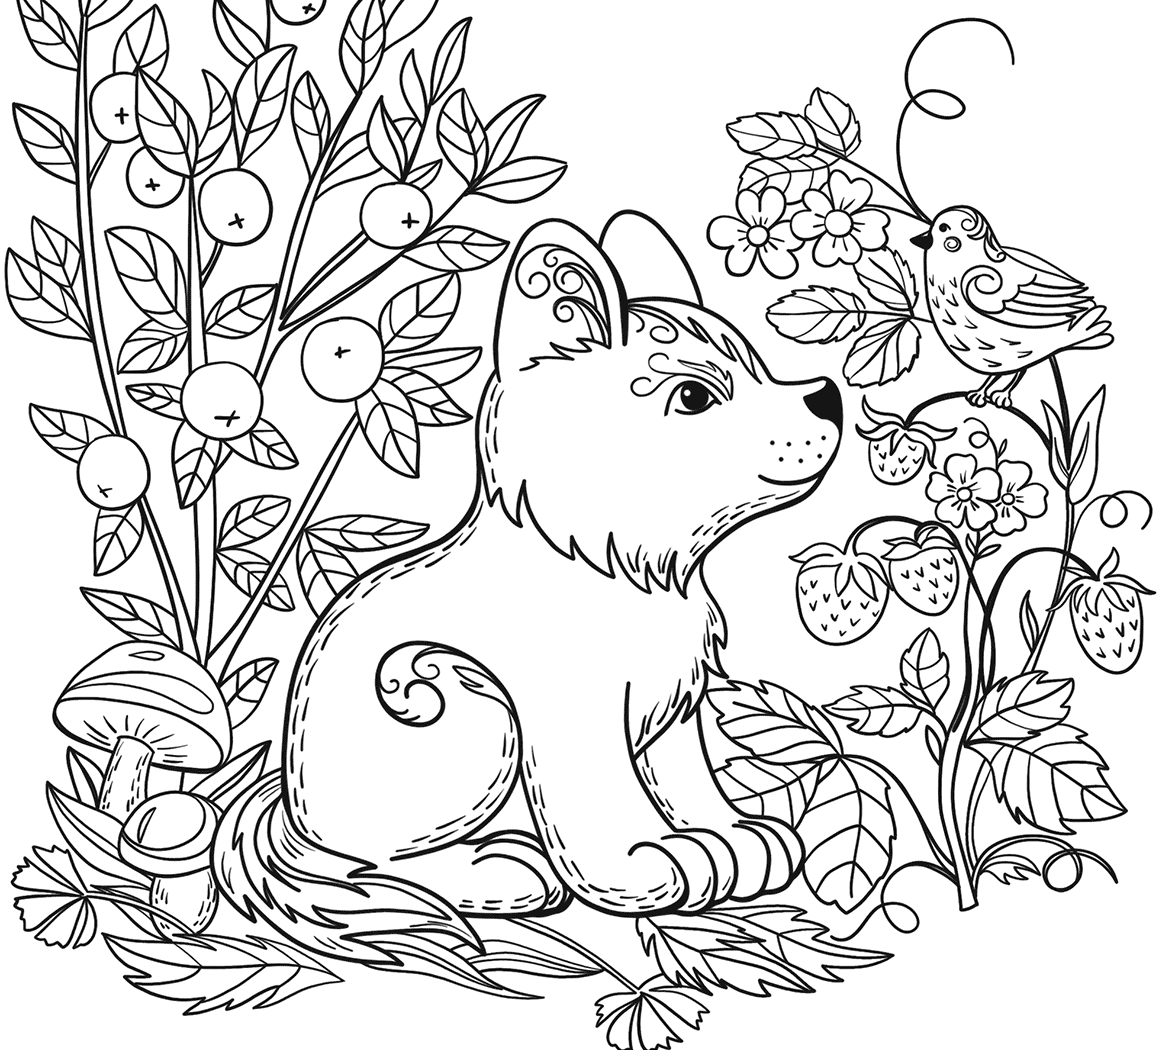 Free Wild Animal Coloring Pages at GetColorings com Free printable